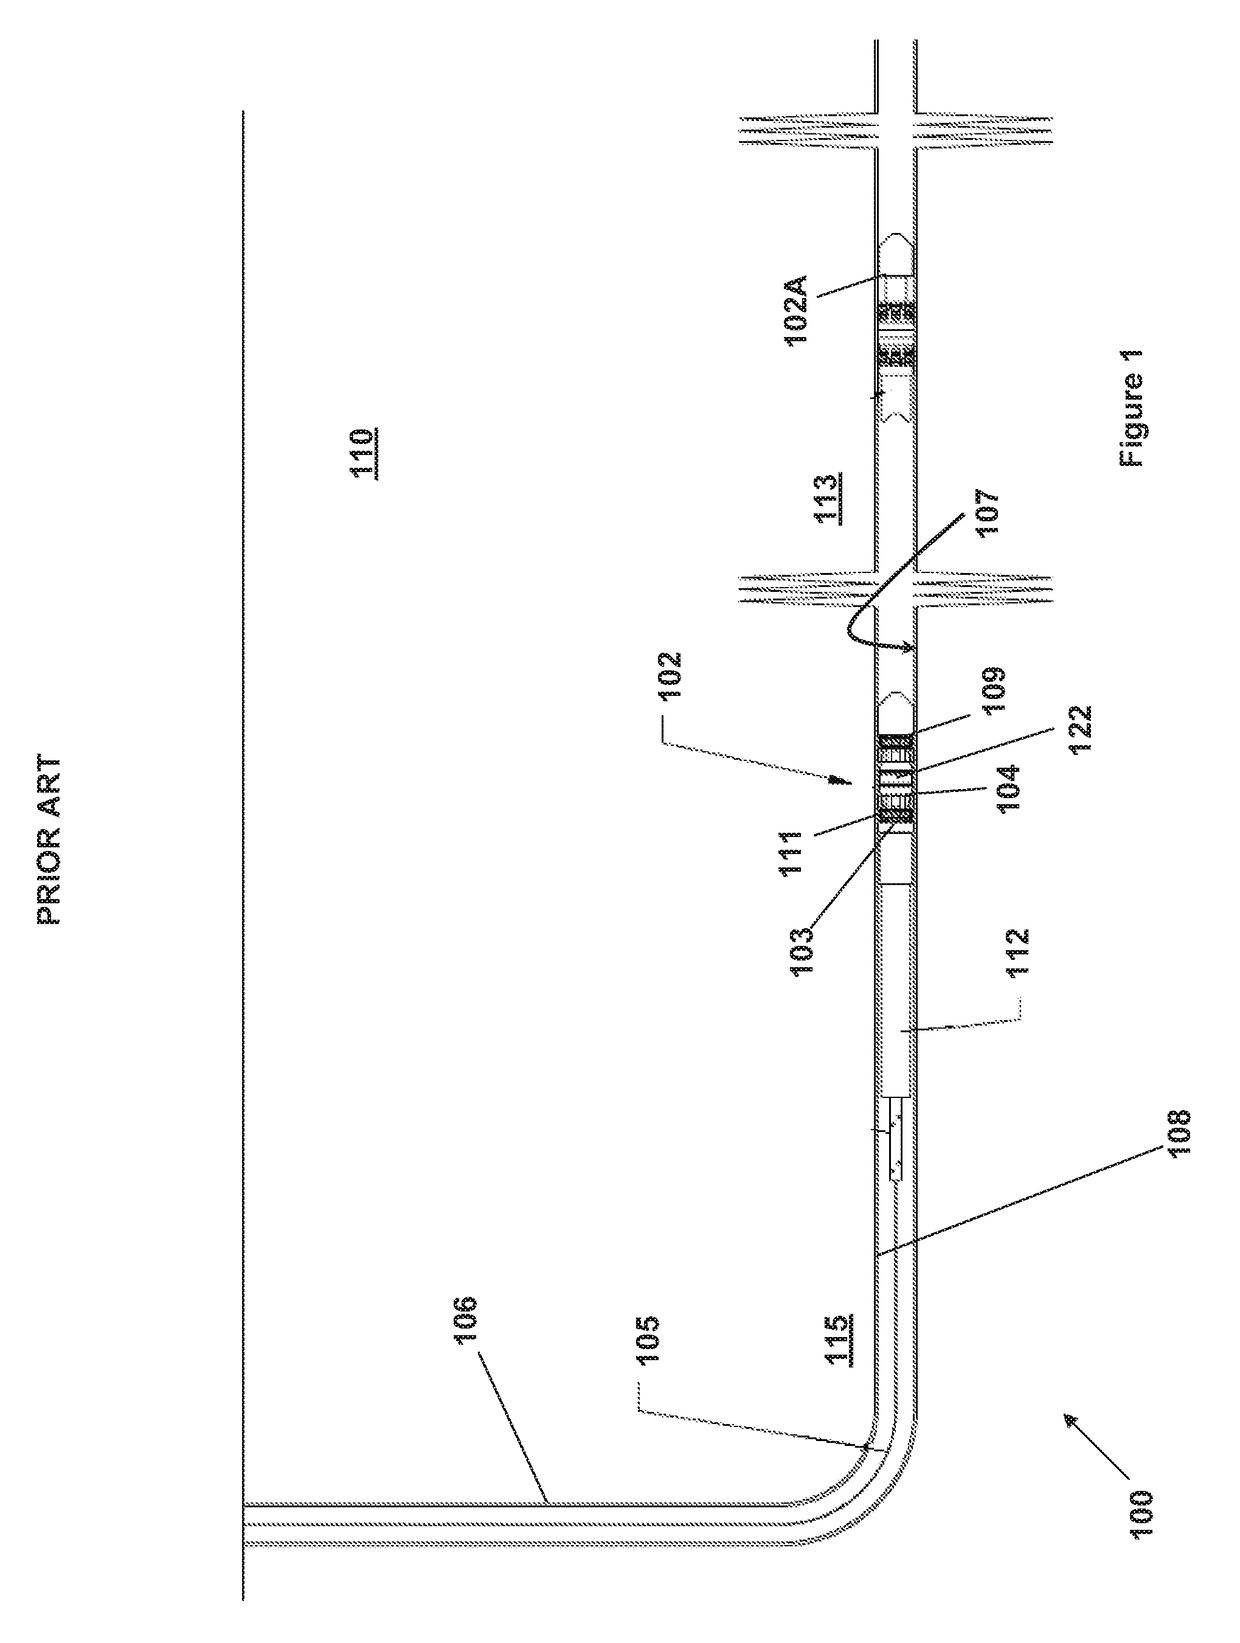 Downhole tool and method of use